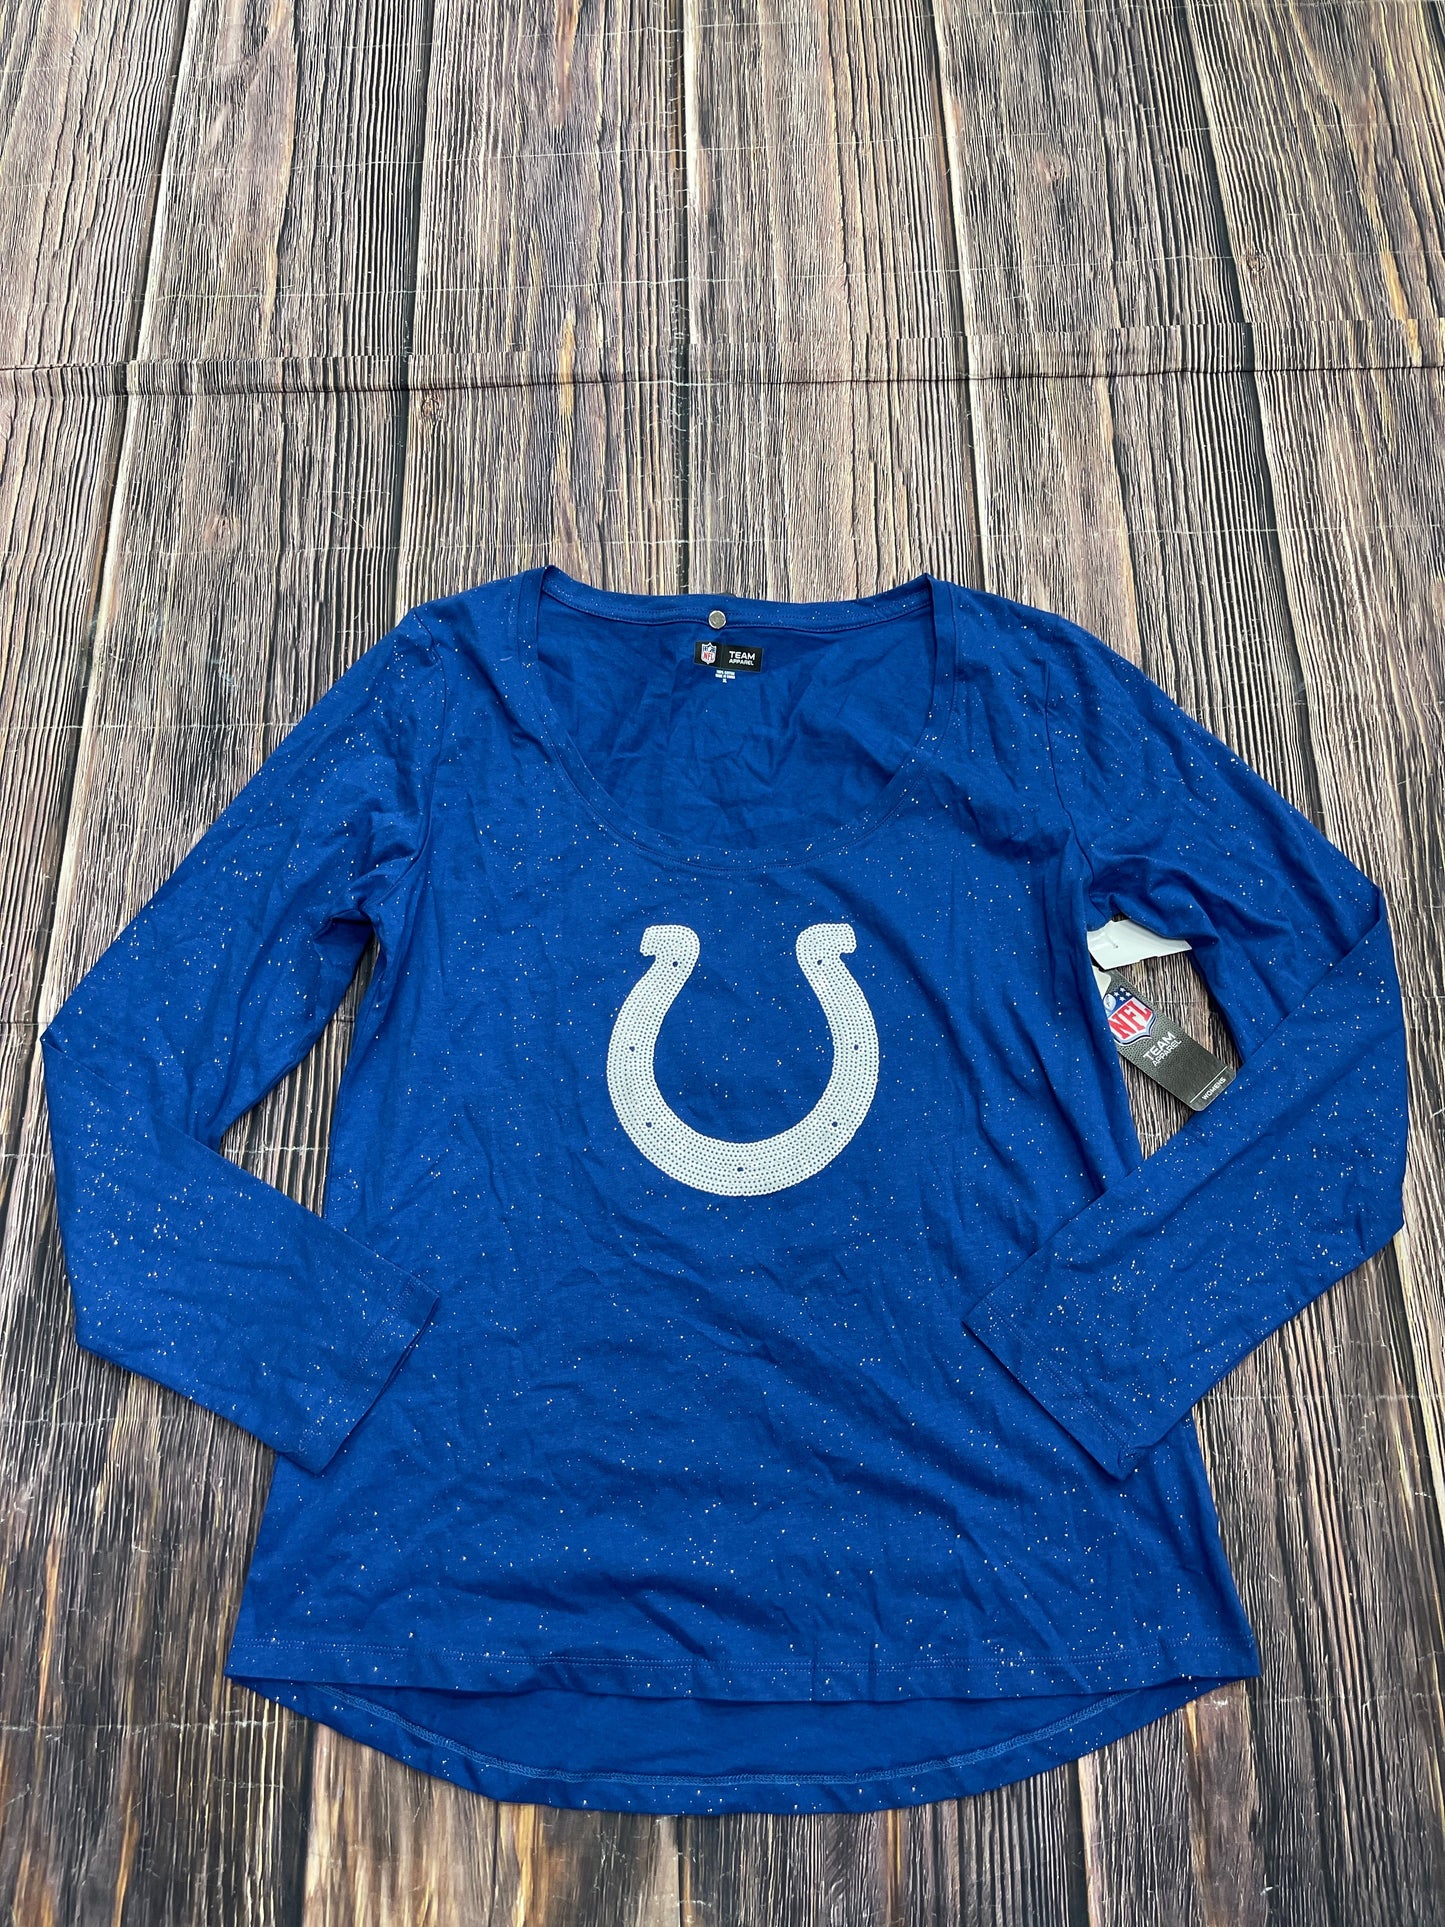 Top Long Sleeve By Nfl  Size: Xl